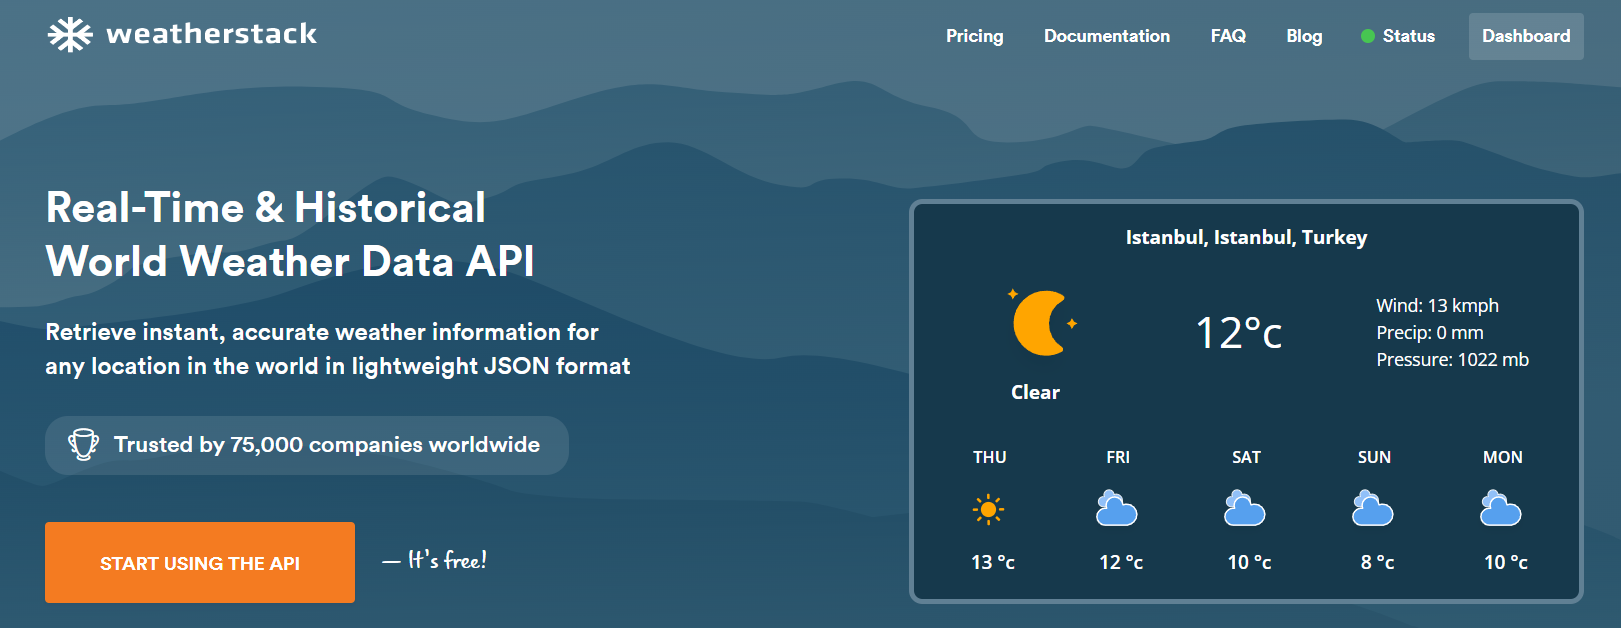 home page of the weatherstack retail weather forecast api